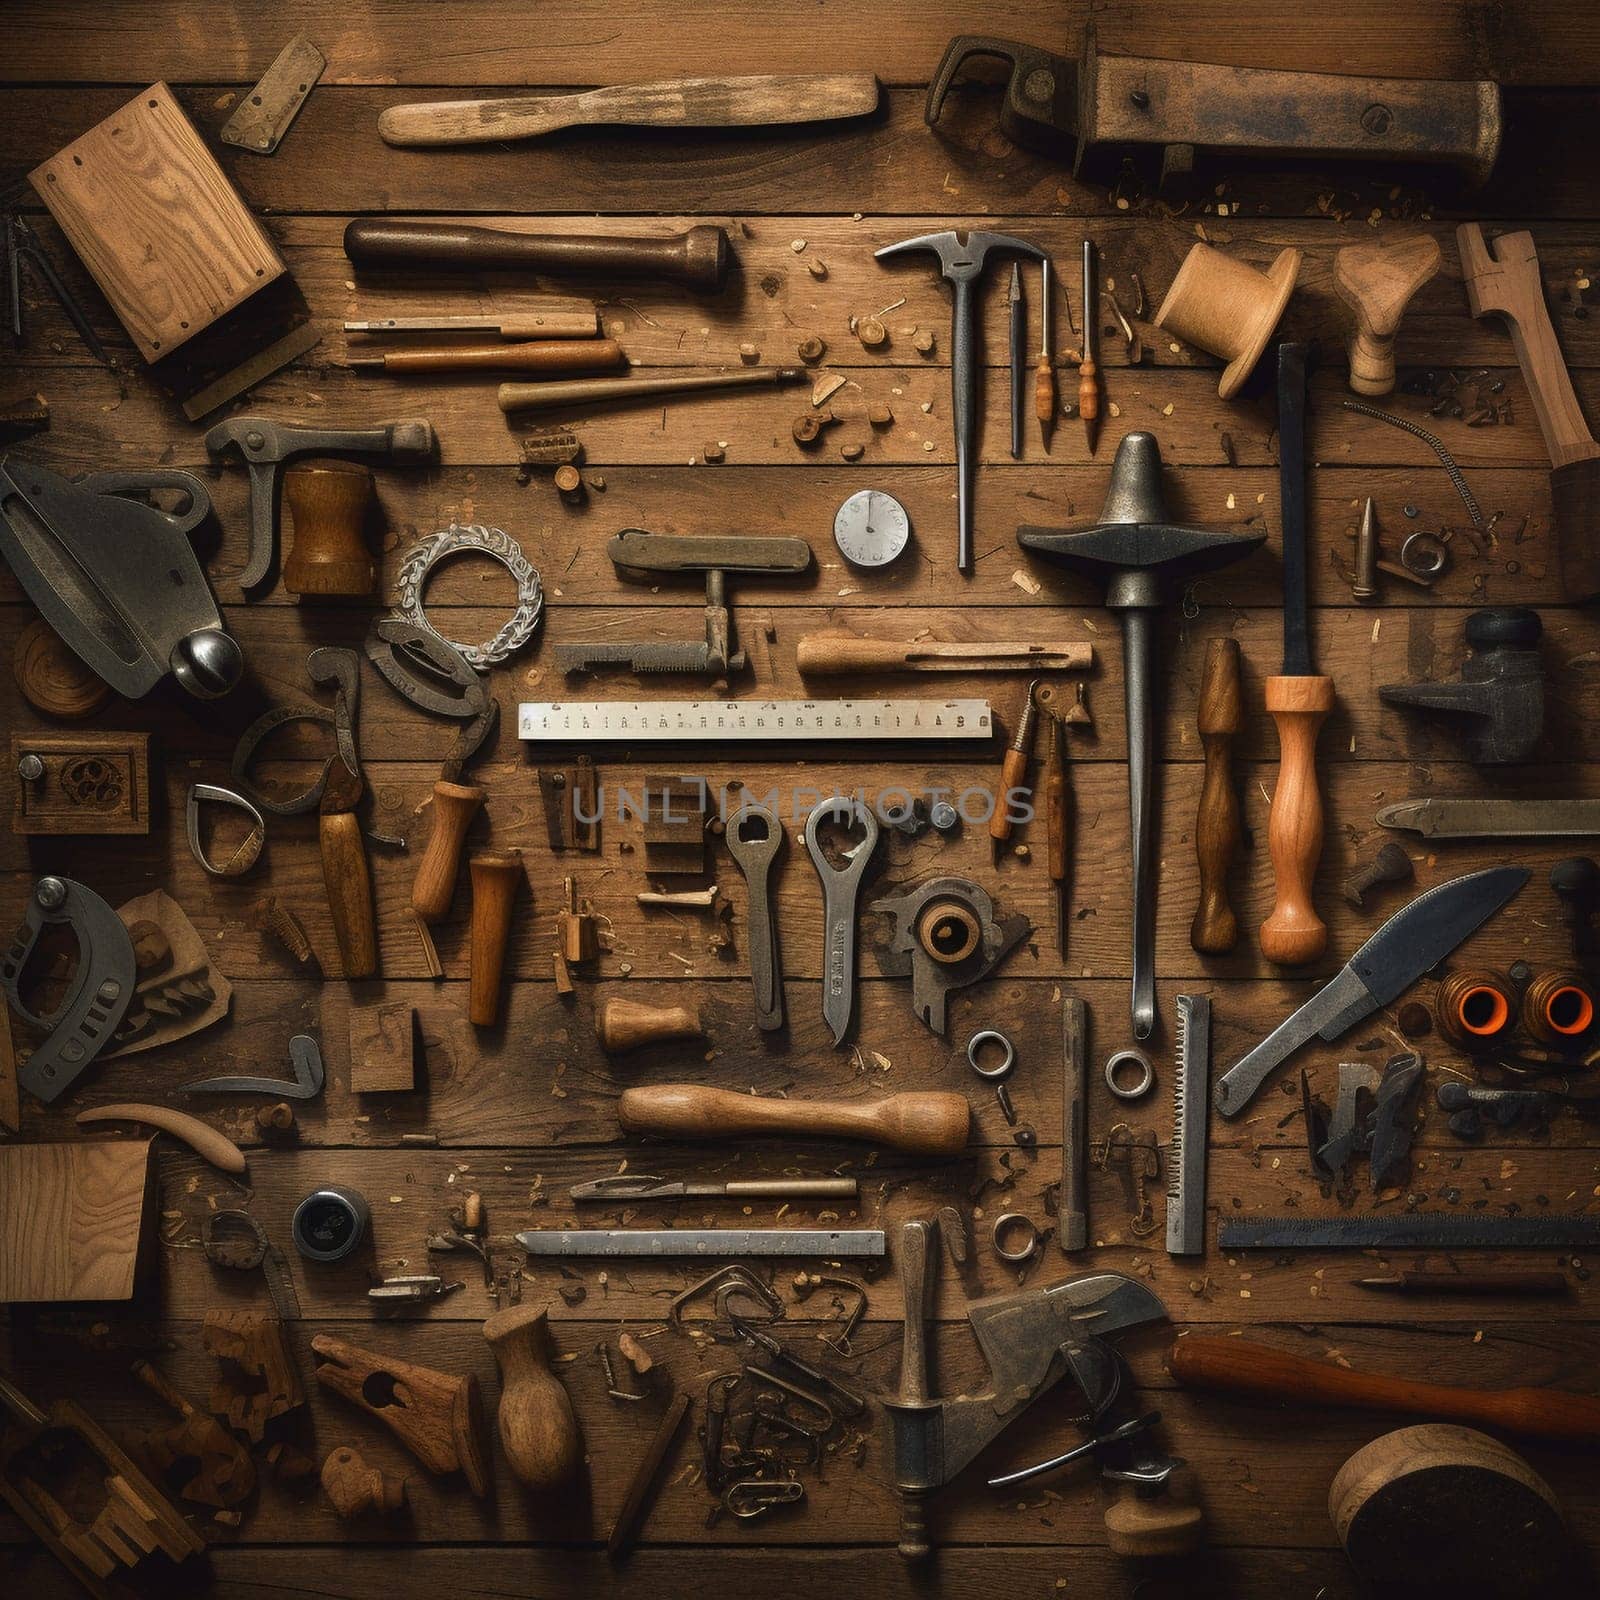 Explore the world of woodworking with this image showcasing a variety of tools and materials, including saws, chisels, hammers, measuring tapes, wood shavings, and different types of wood.